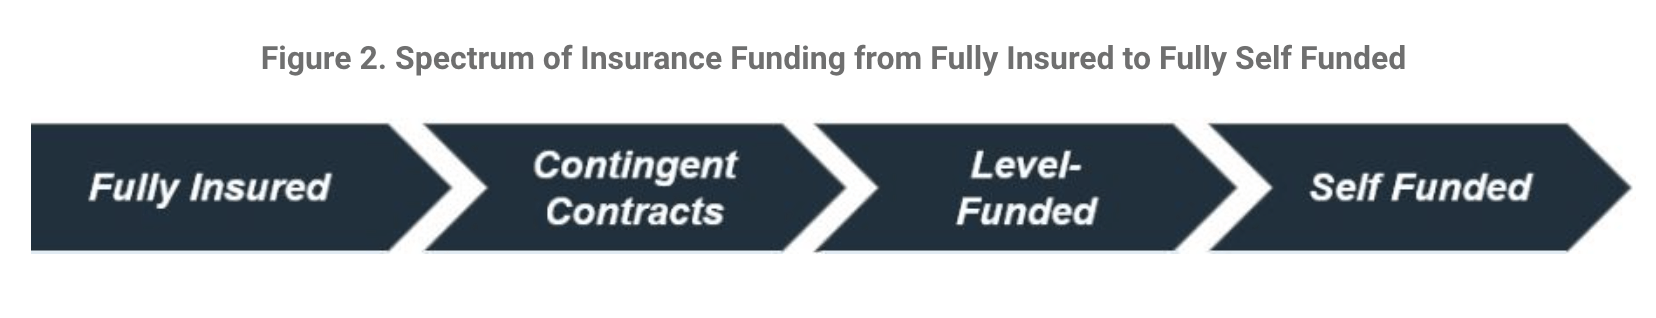 Figure 2. Spectrum of Insurance Funding from Fully Insured to Fully Self Funded